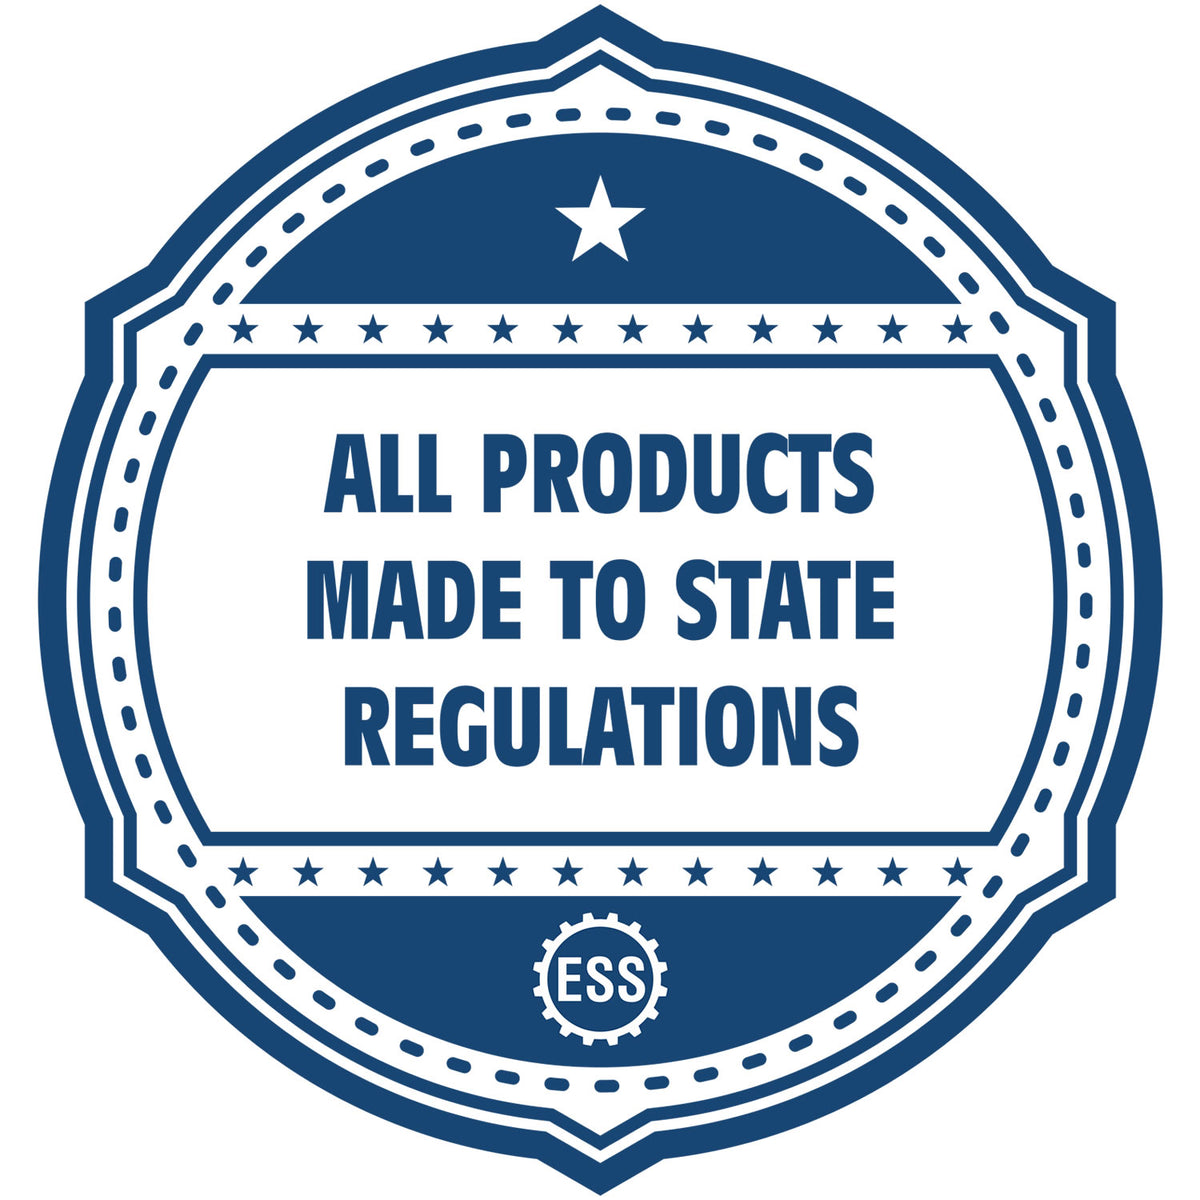 An icon or badge element for the State of Nebraska Long Reach Architectural Embossing Seal showing that this product is made in compliance with state regulations.